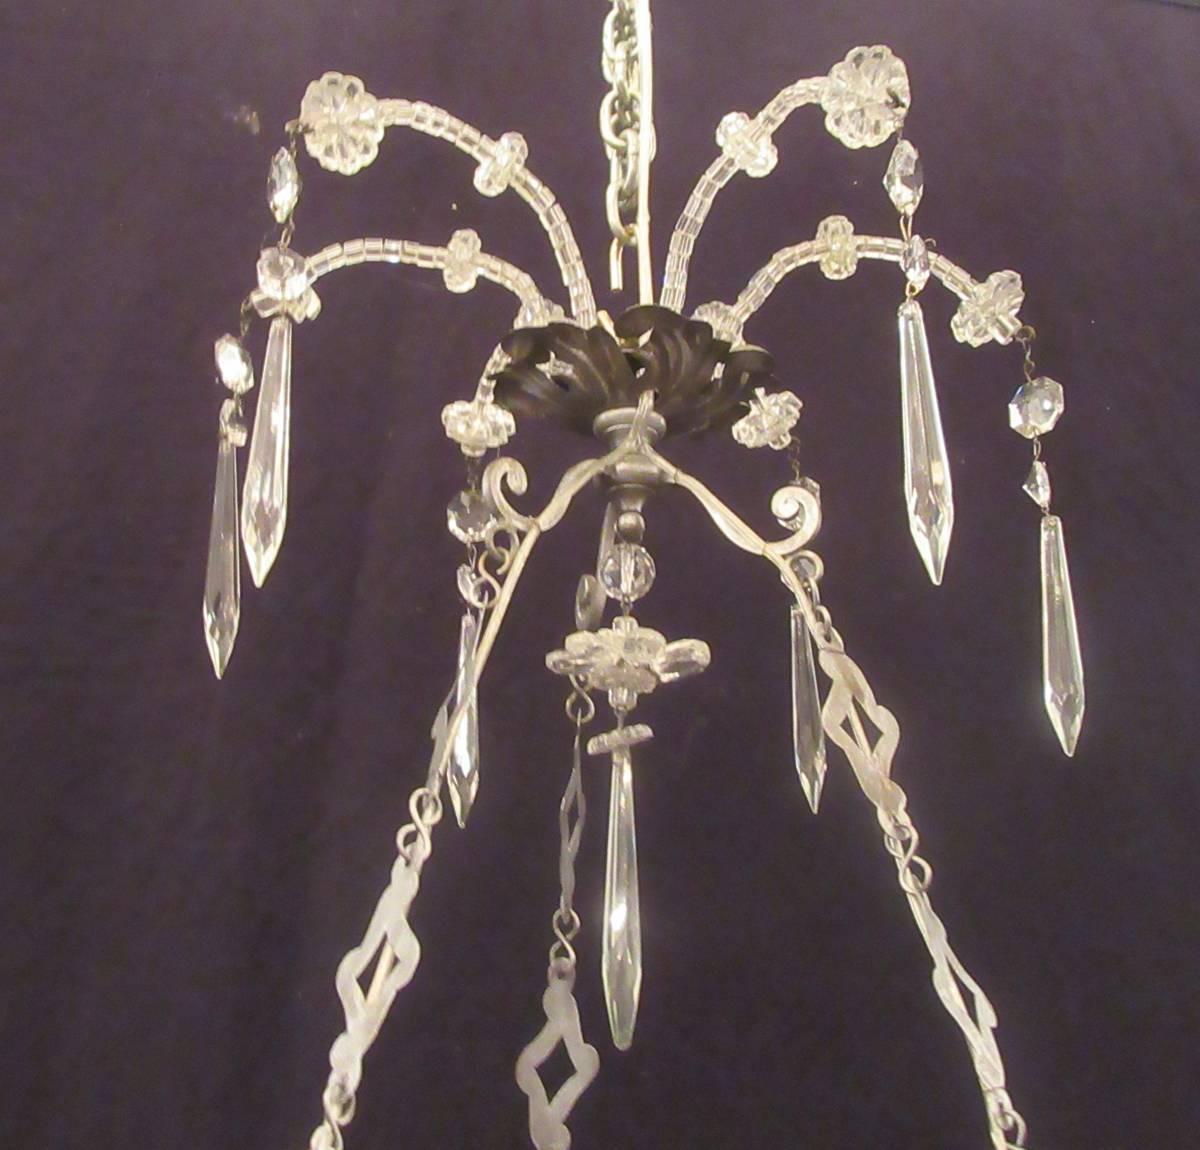 This chandelier was made in Italy in the early-19th century, circa 1820. This chandelier has a crown with crystal beads and rosettes suspended by three brass chains and six arms with crystal flowers and prisms. The chandelier was originally candle